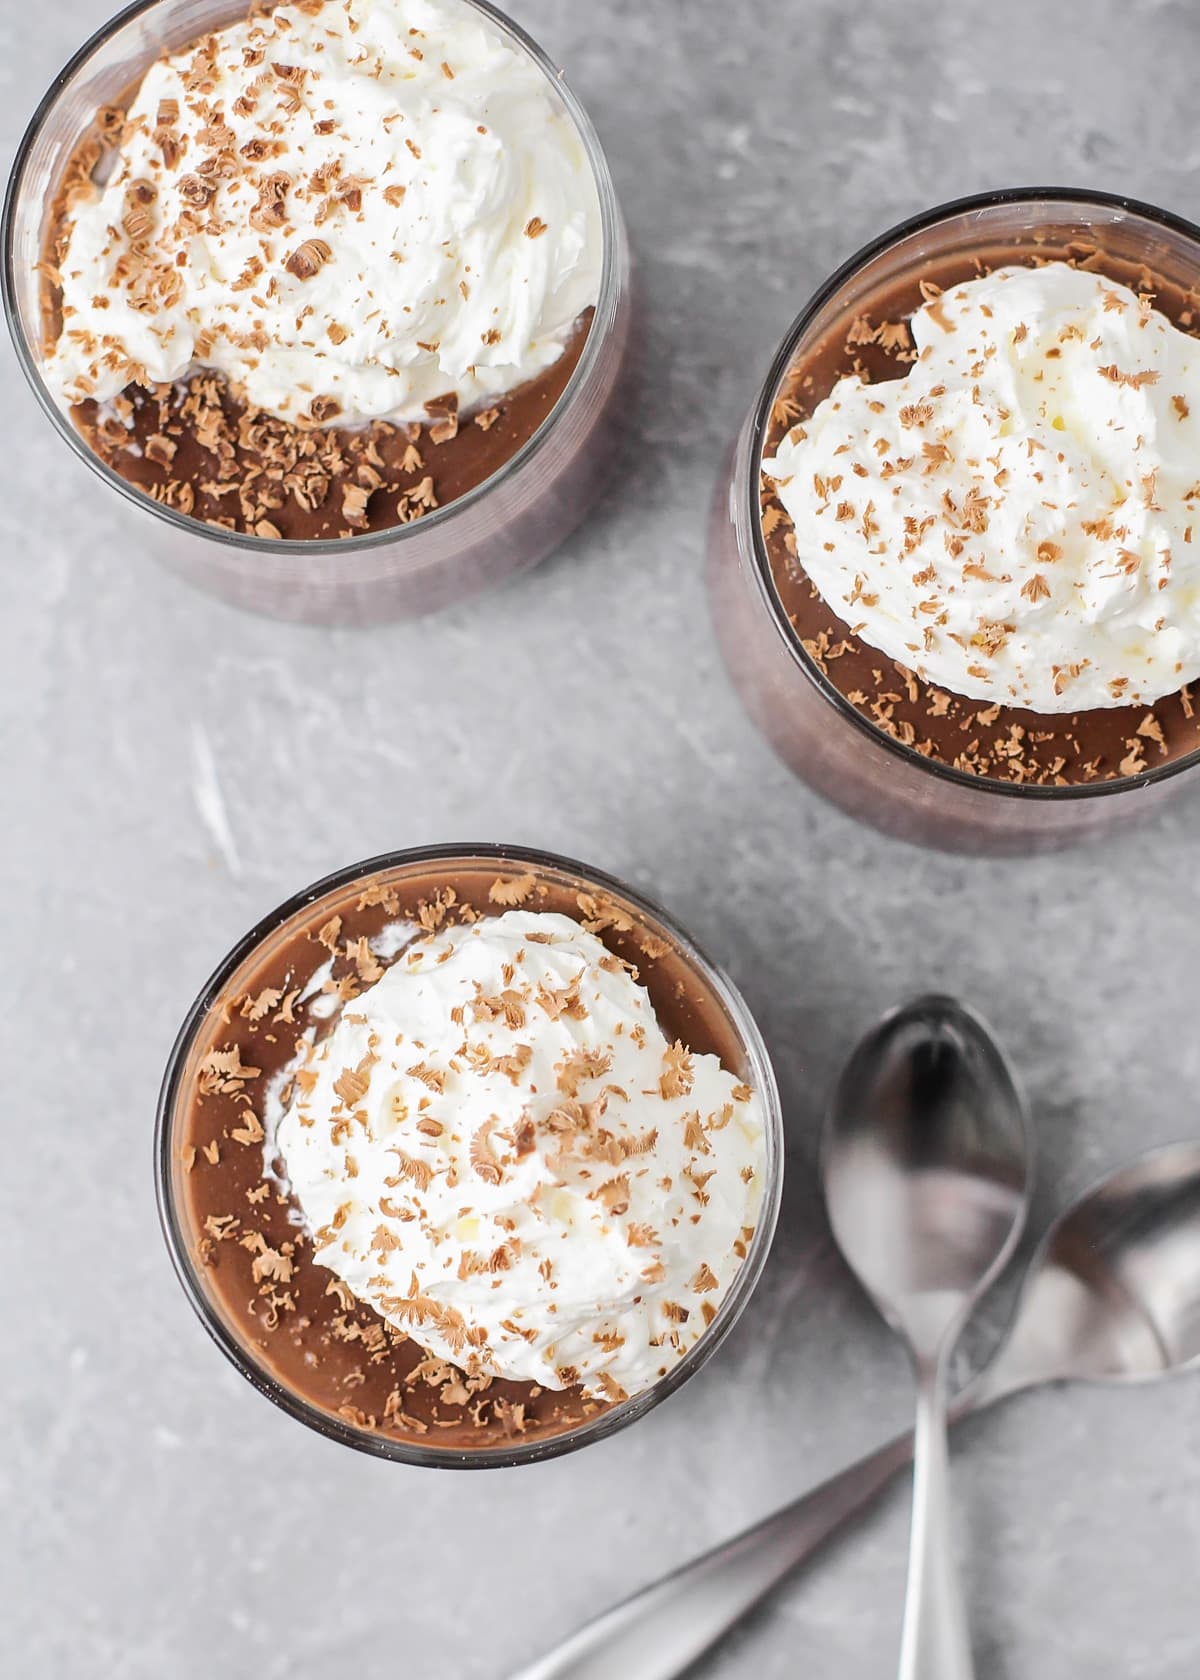 Three glass cups filled with chocolate pudding recipe topped with whipped cream.